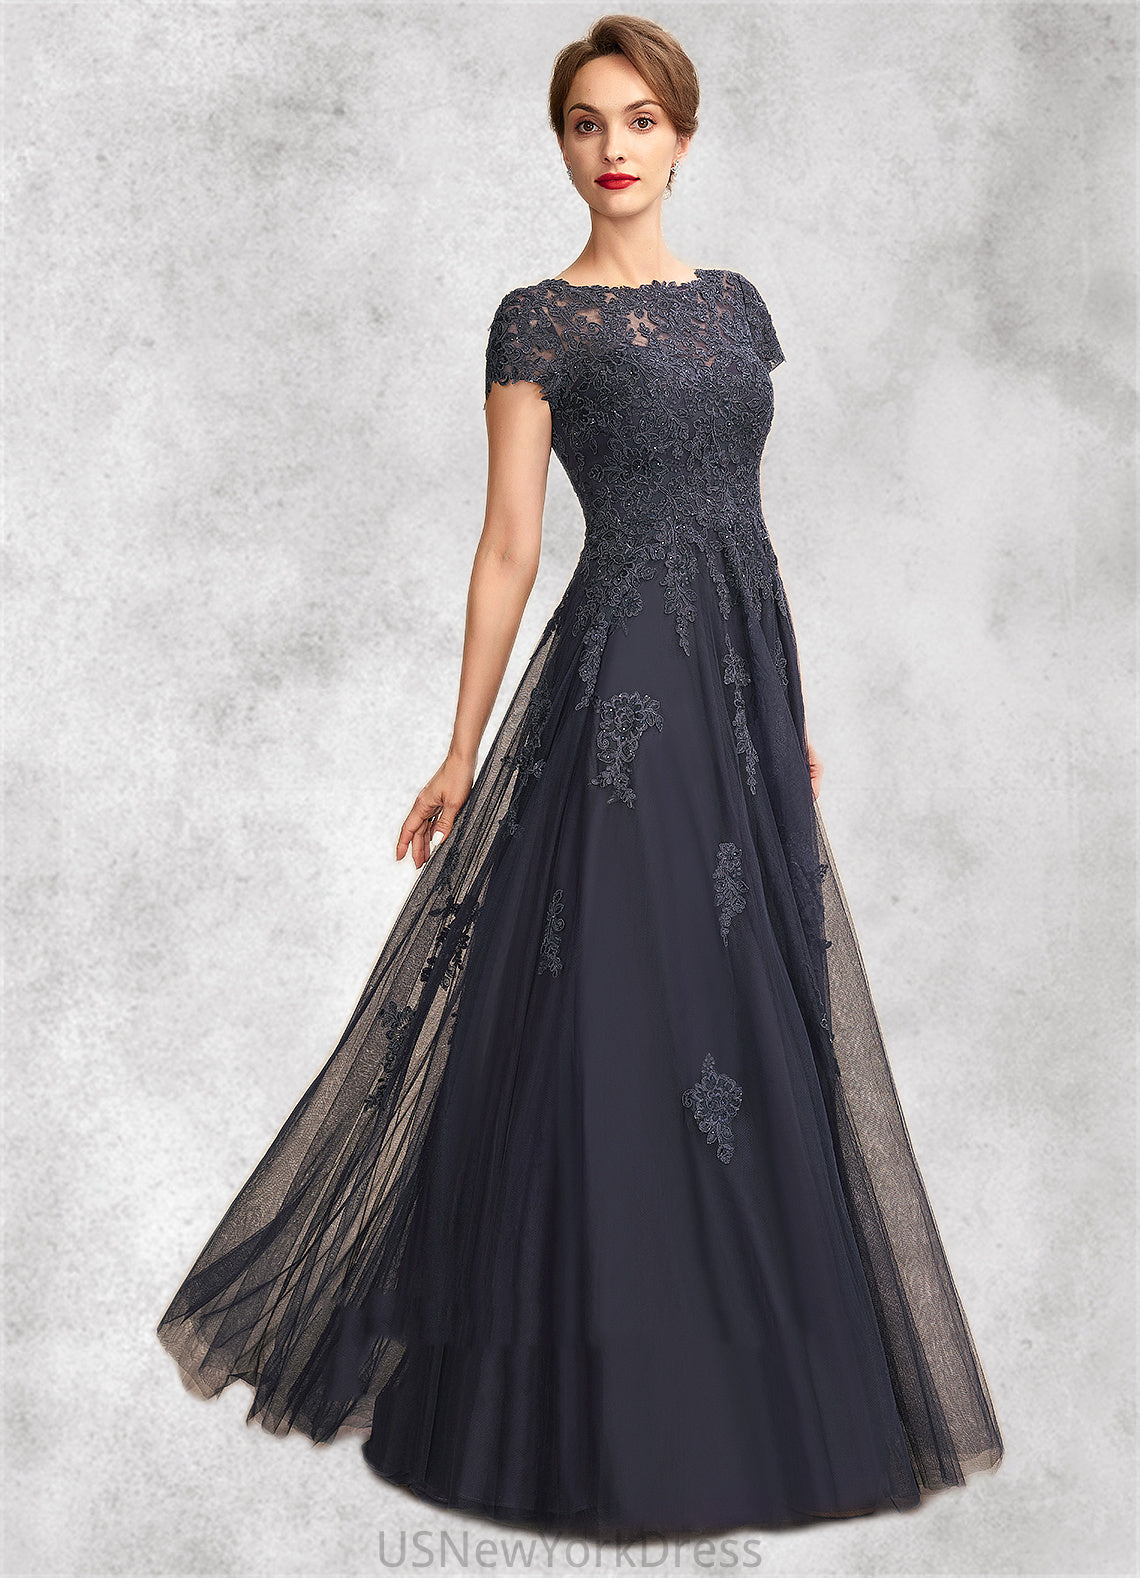 Sylvia A-Line Scoop Neck Floor-Length Tulle Lace Mother of the Bride Dress With Beading DJ126P0015029